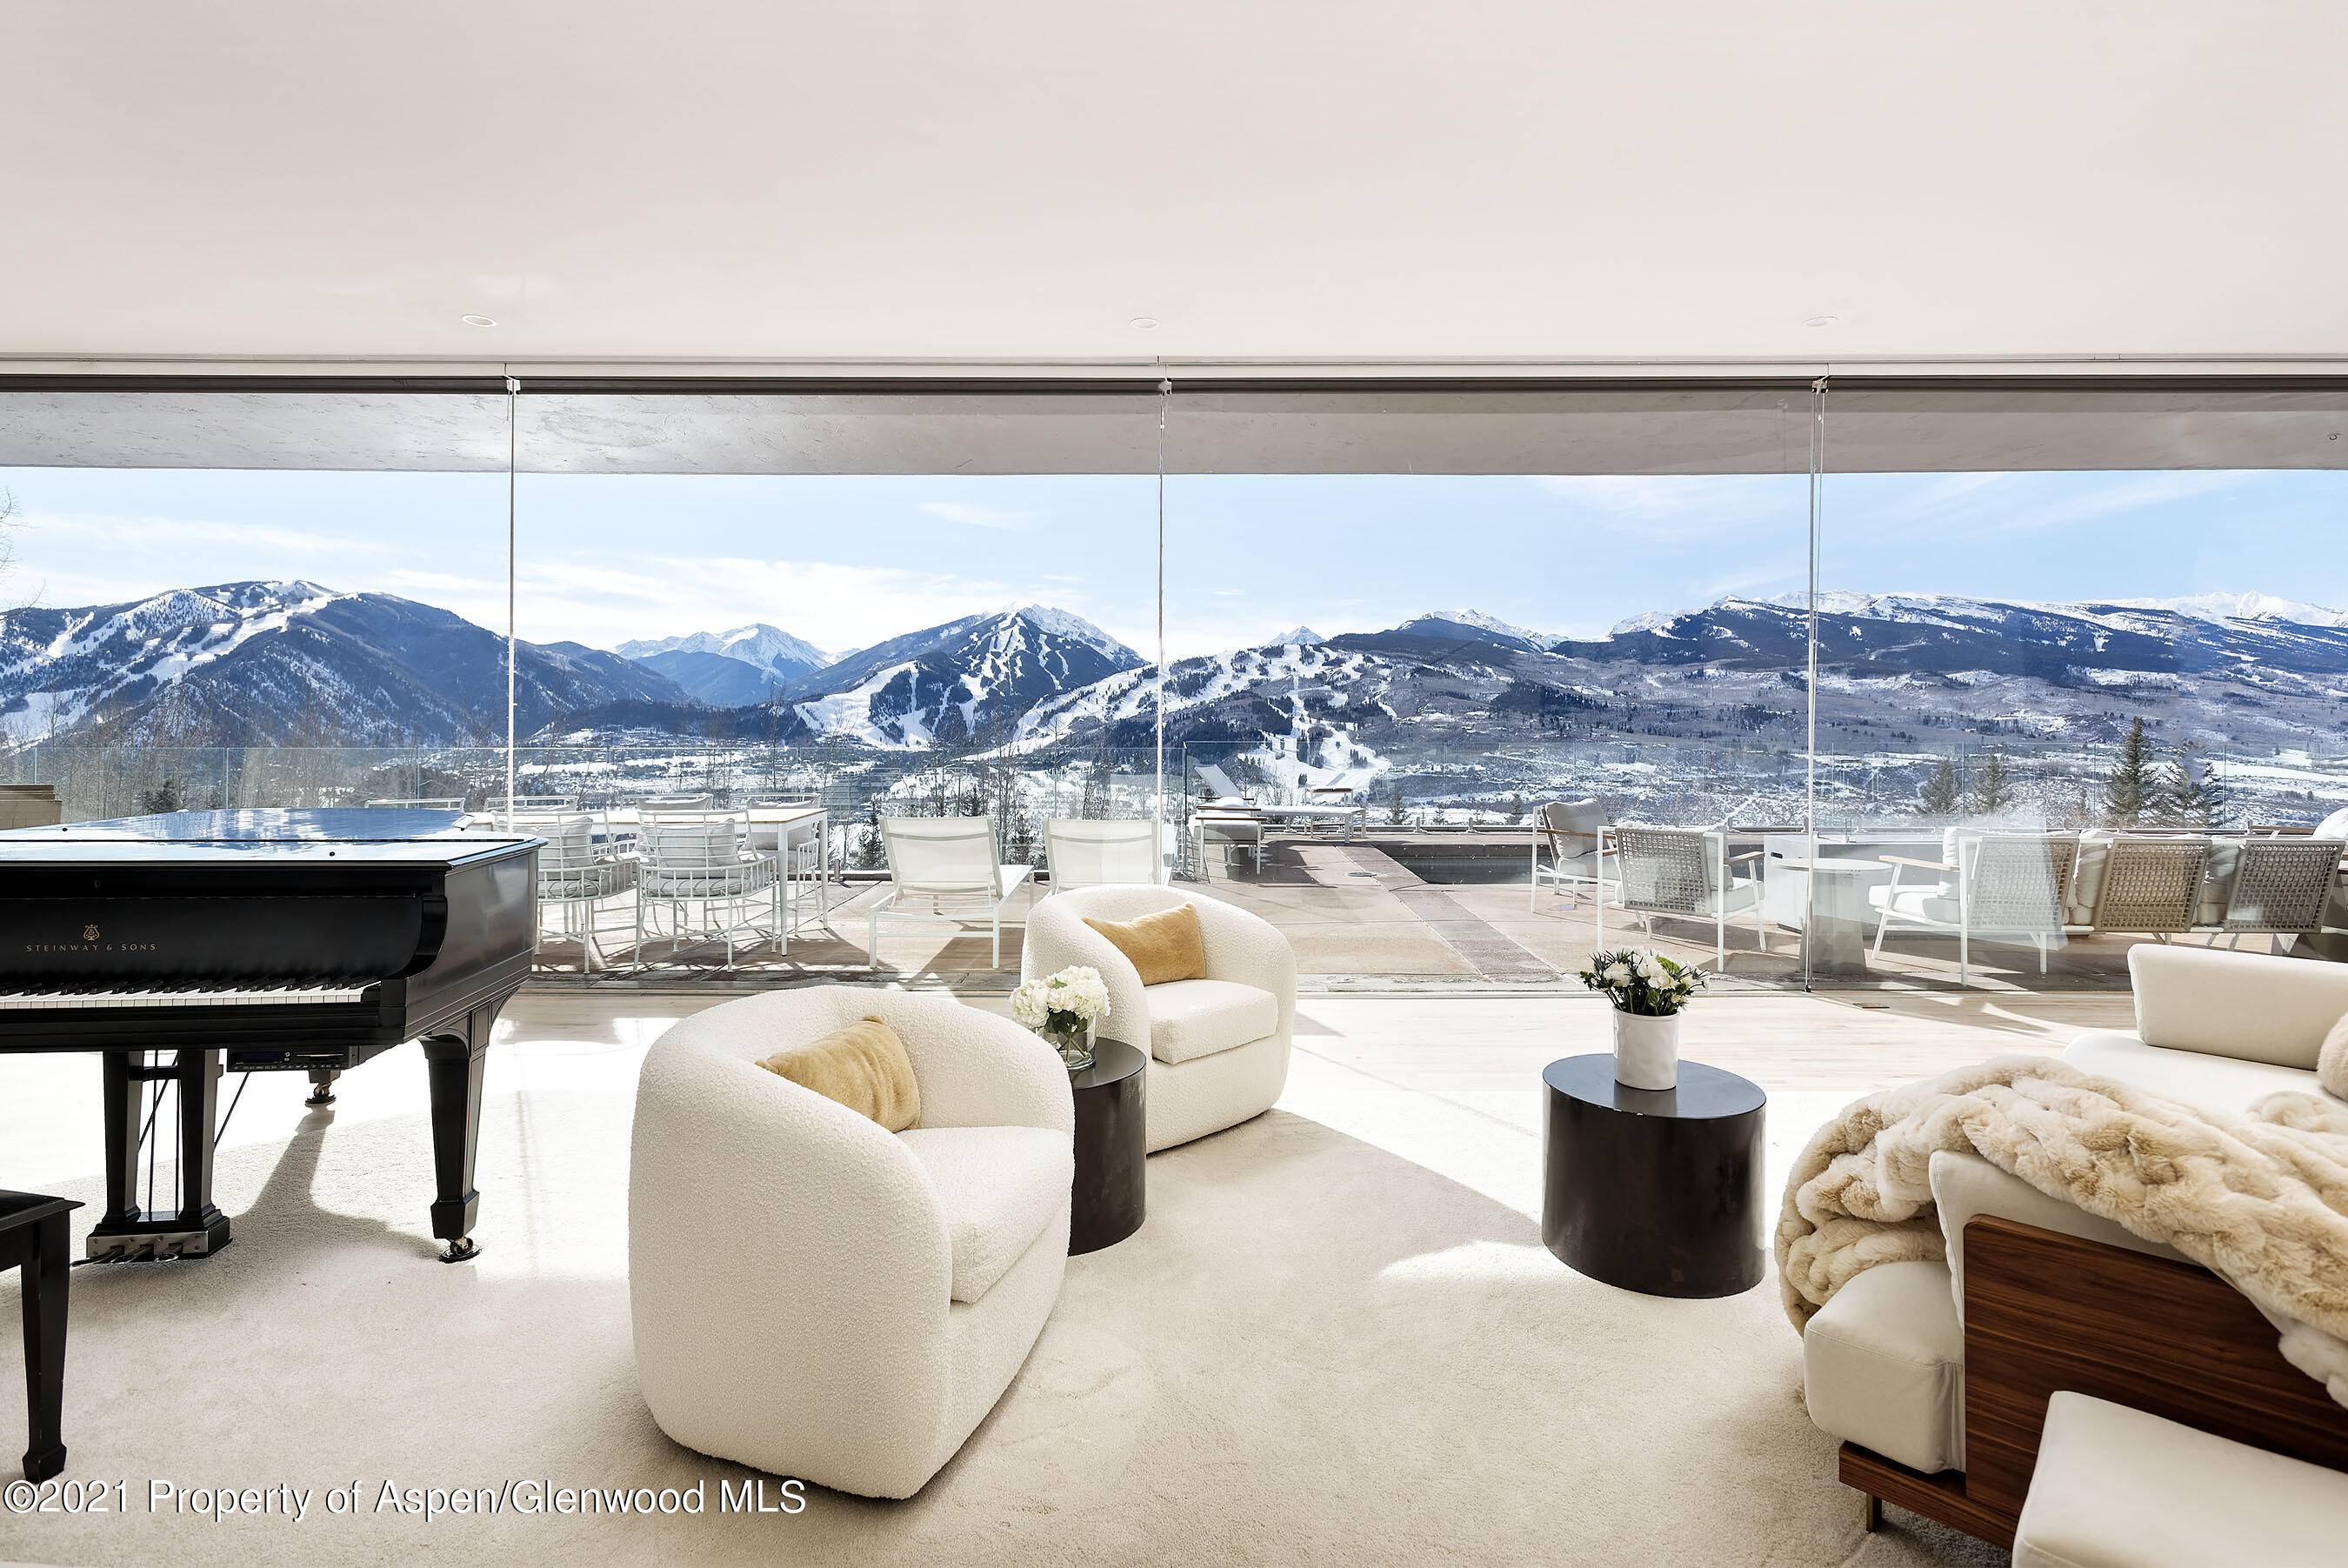 This Robin Molny Starwood estate is one of Aspen's most iconic modern residences.